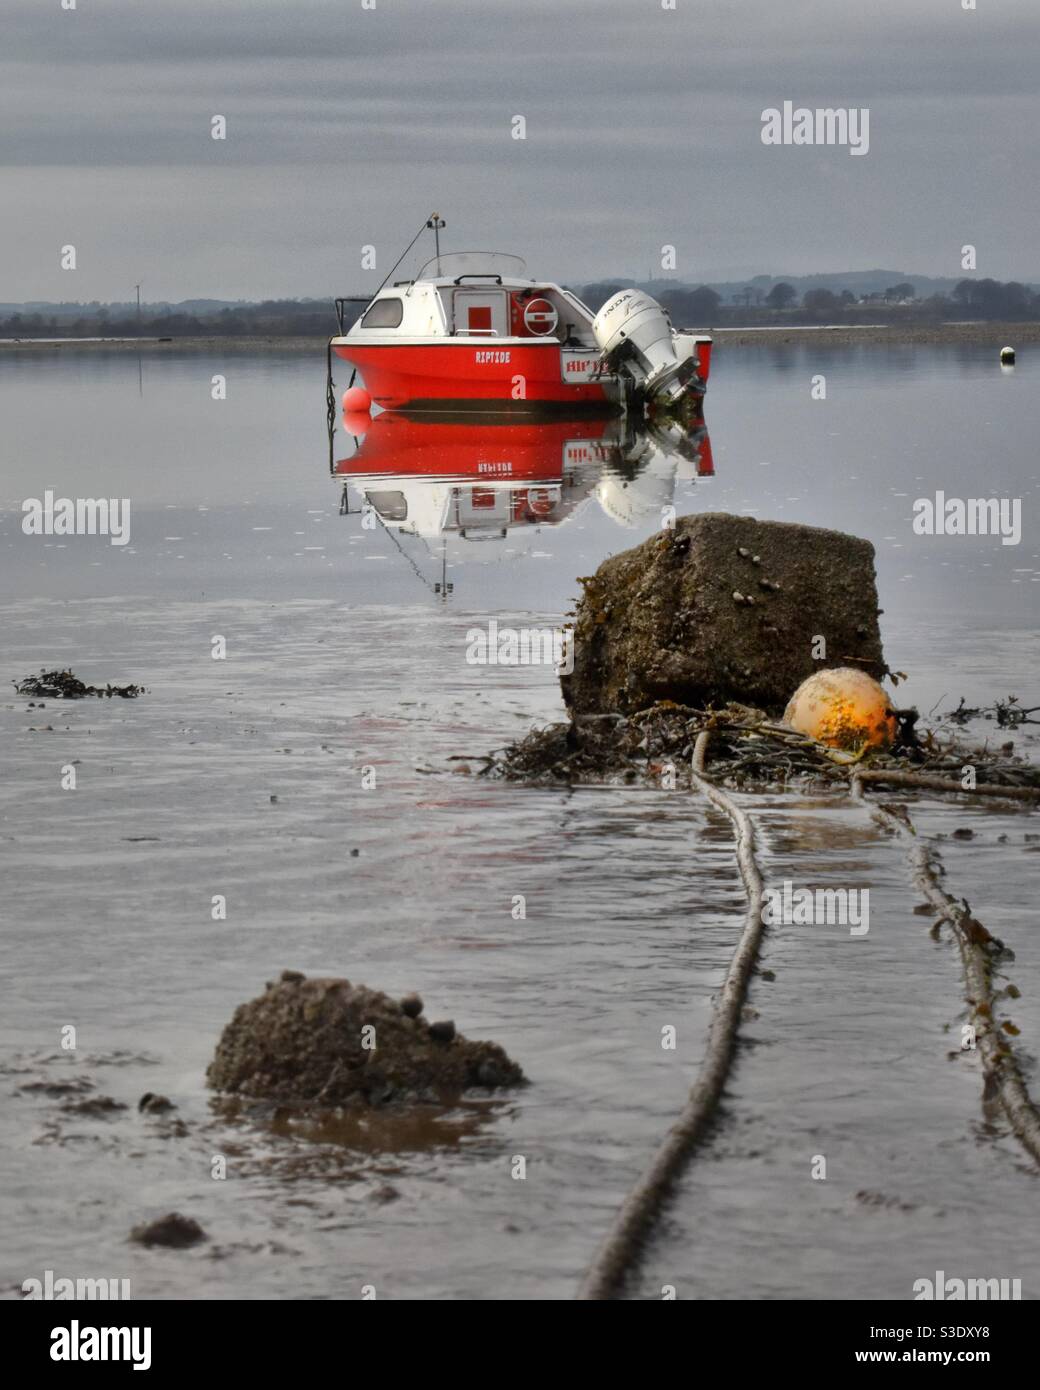 Red boat sits in calm waters on a dull day Stock Photo